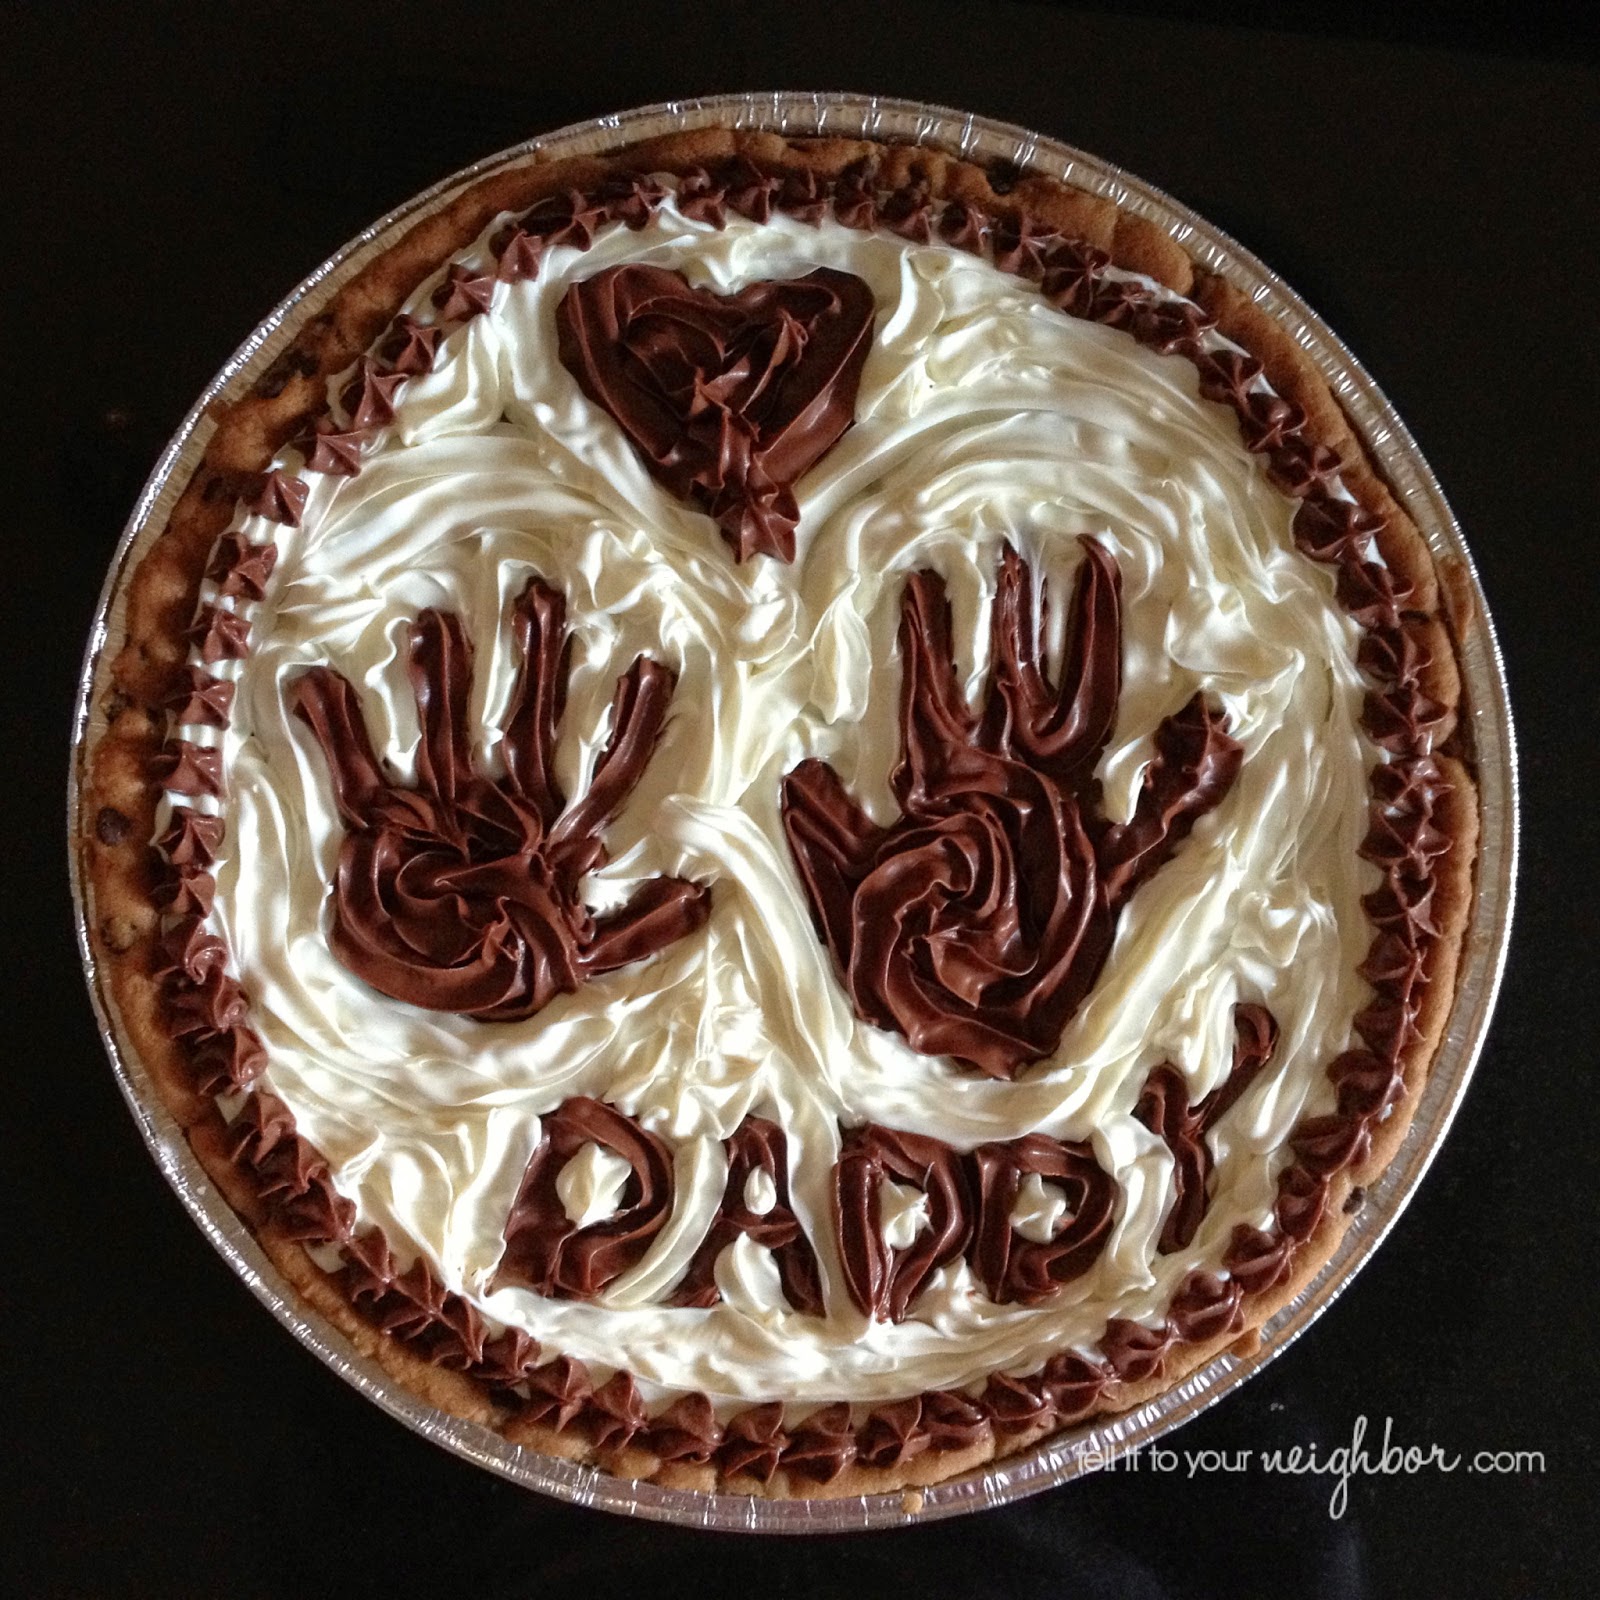 tell it to your neighbor!: Easy Homemade Father's Day Cakes